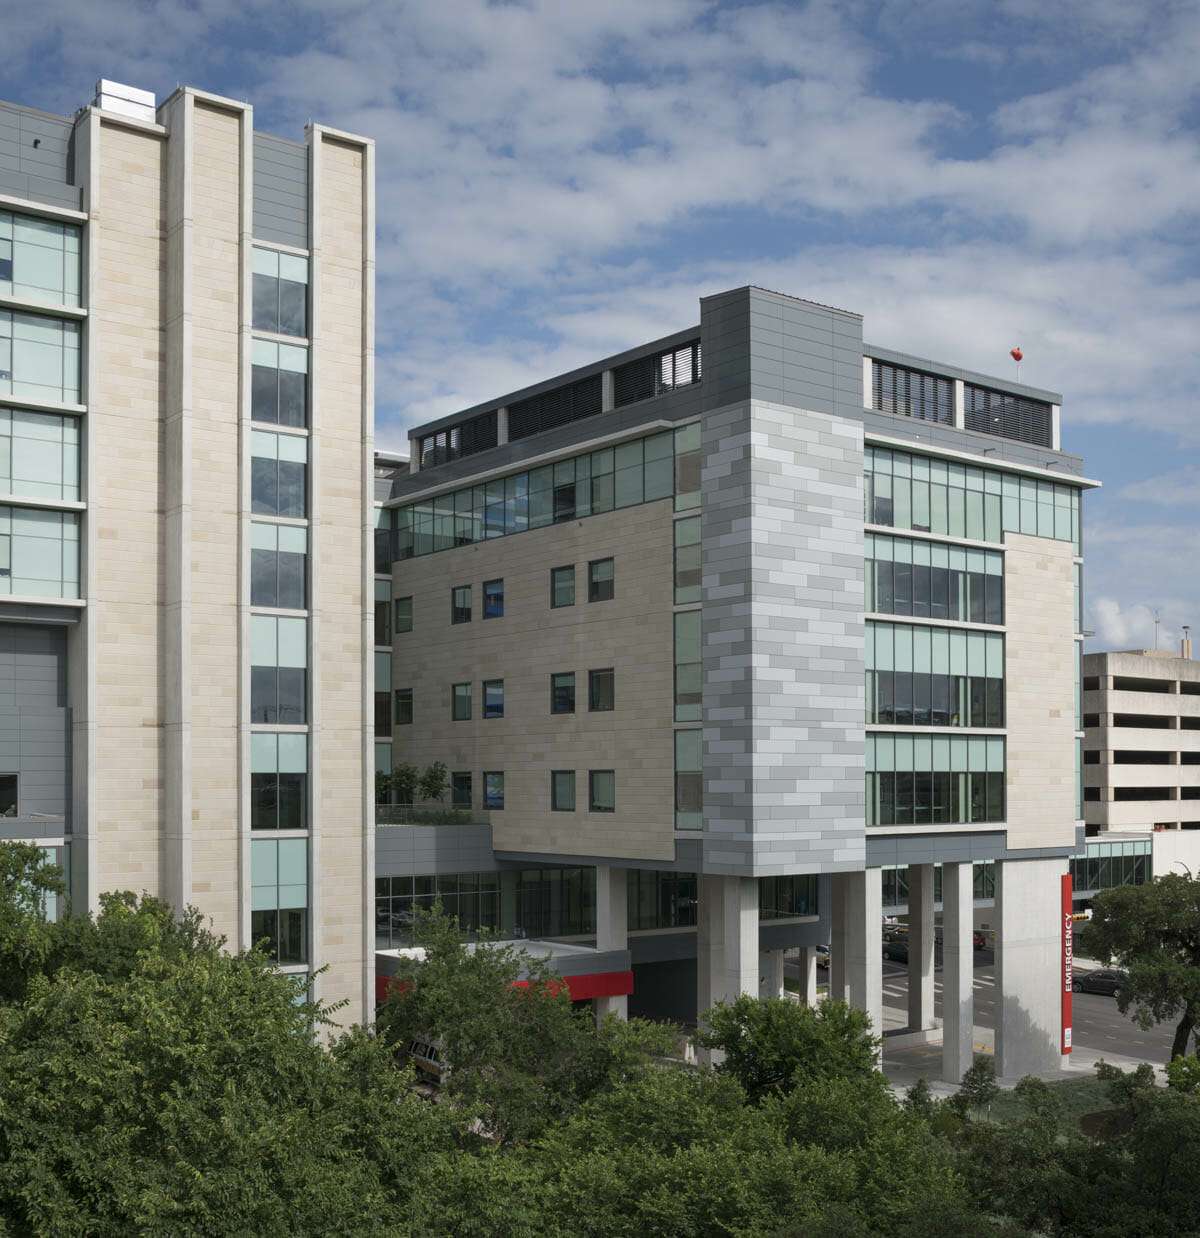 Dell Seton Medical Center at The University of Texas | EXP